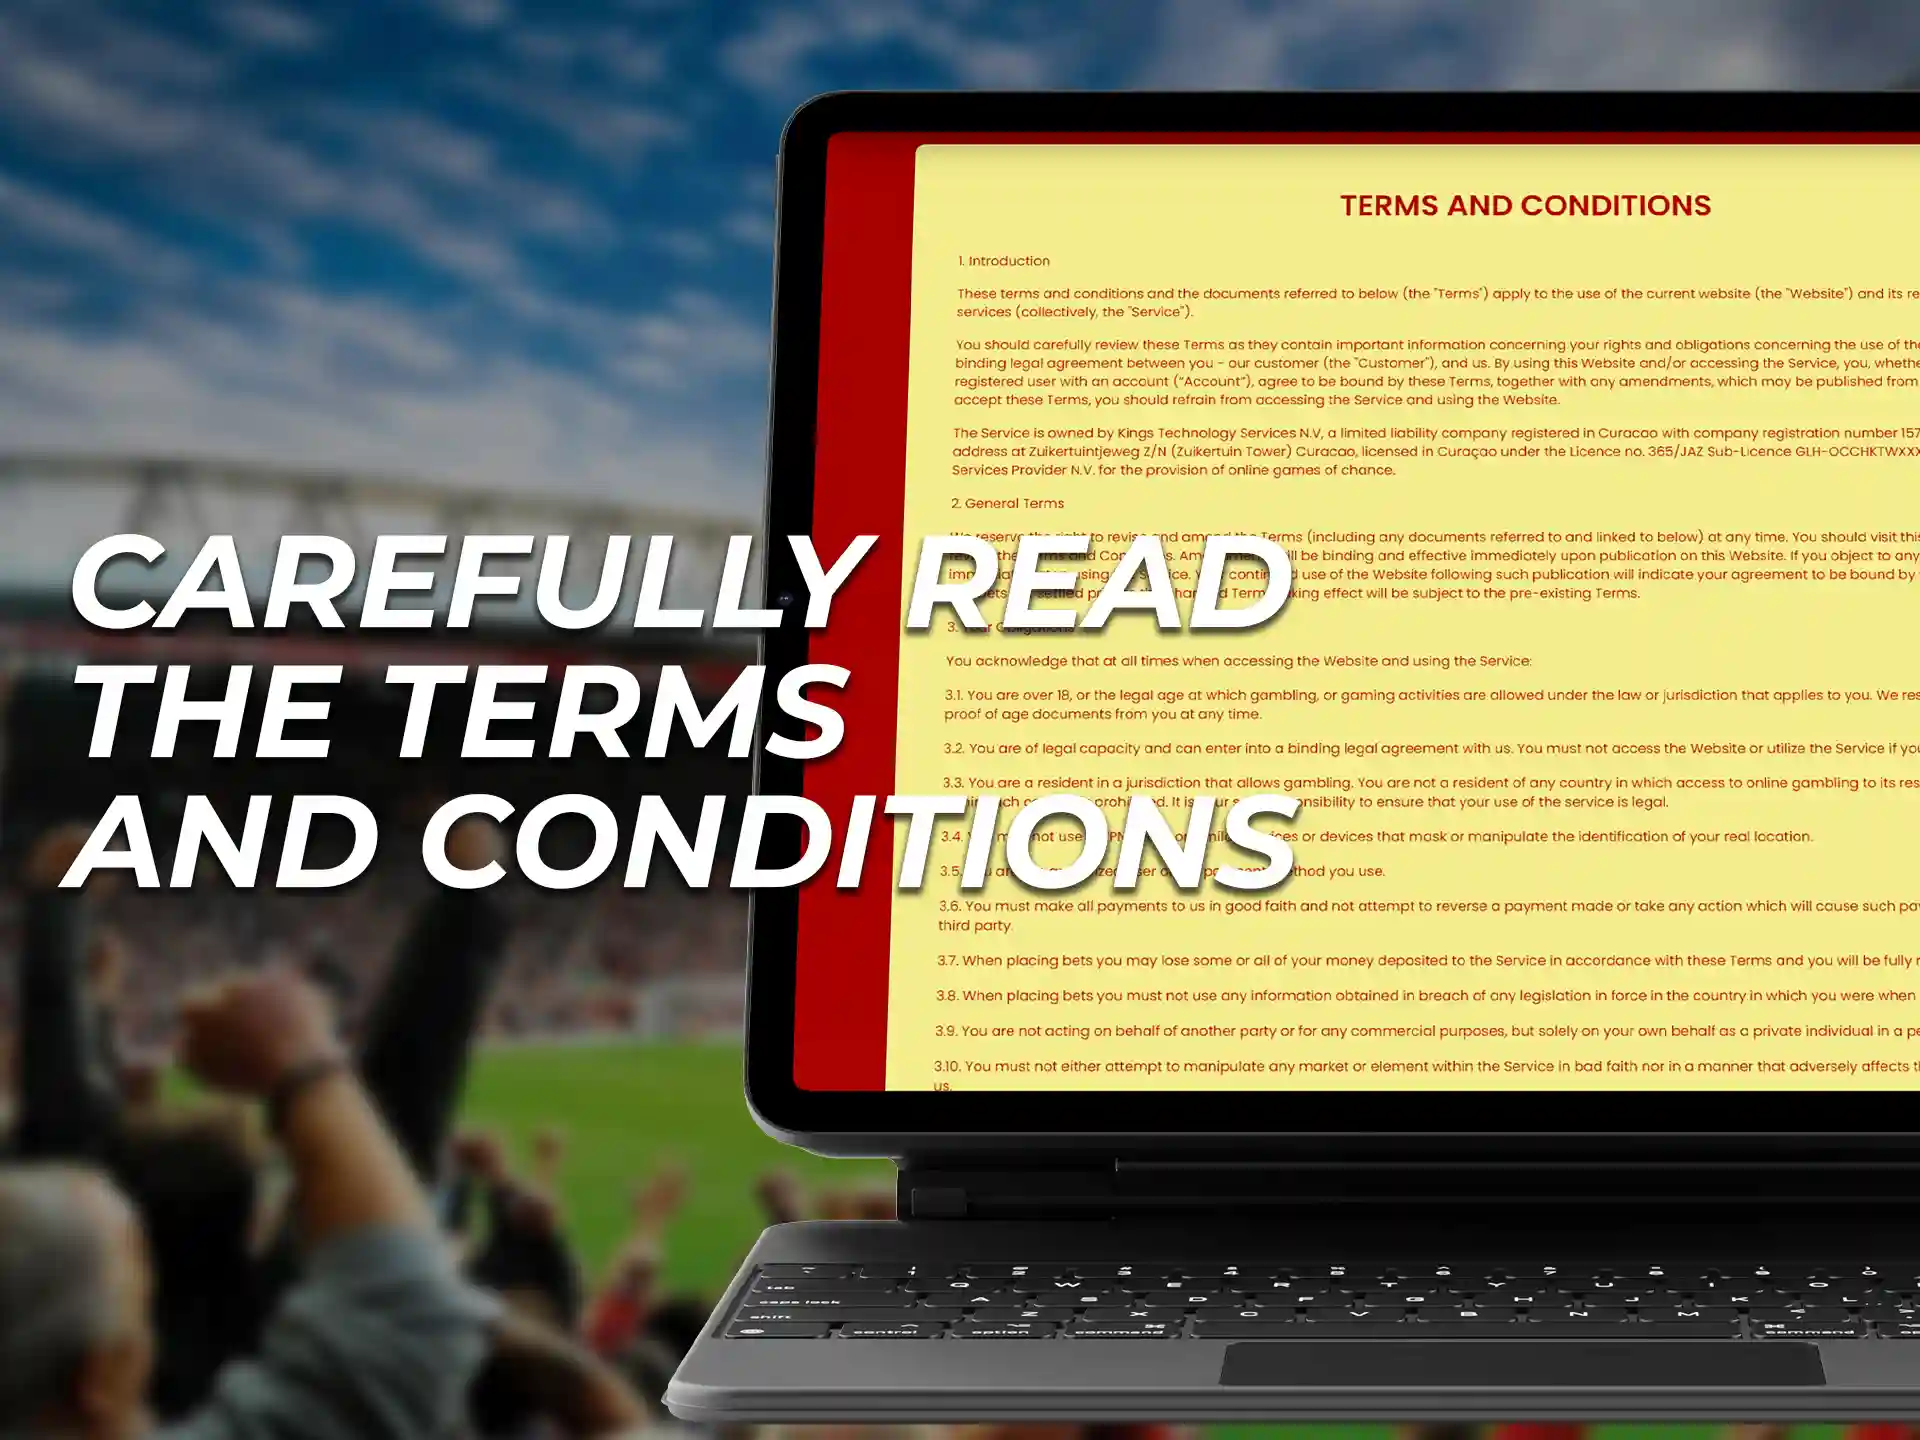 Please read carefully the terms and conditions that the site offers you.